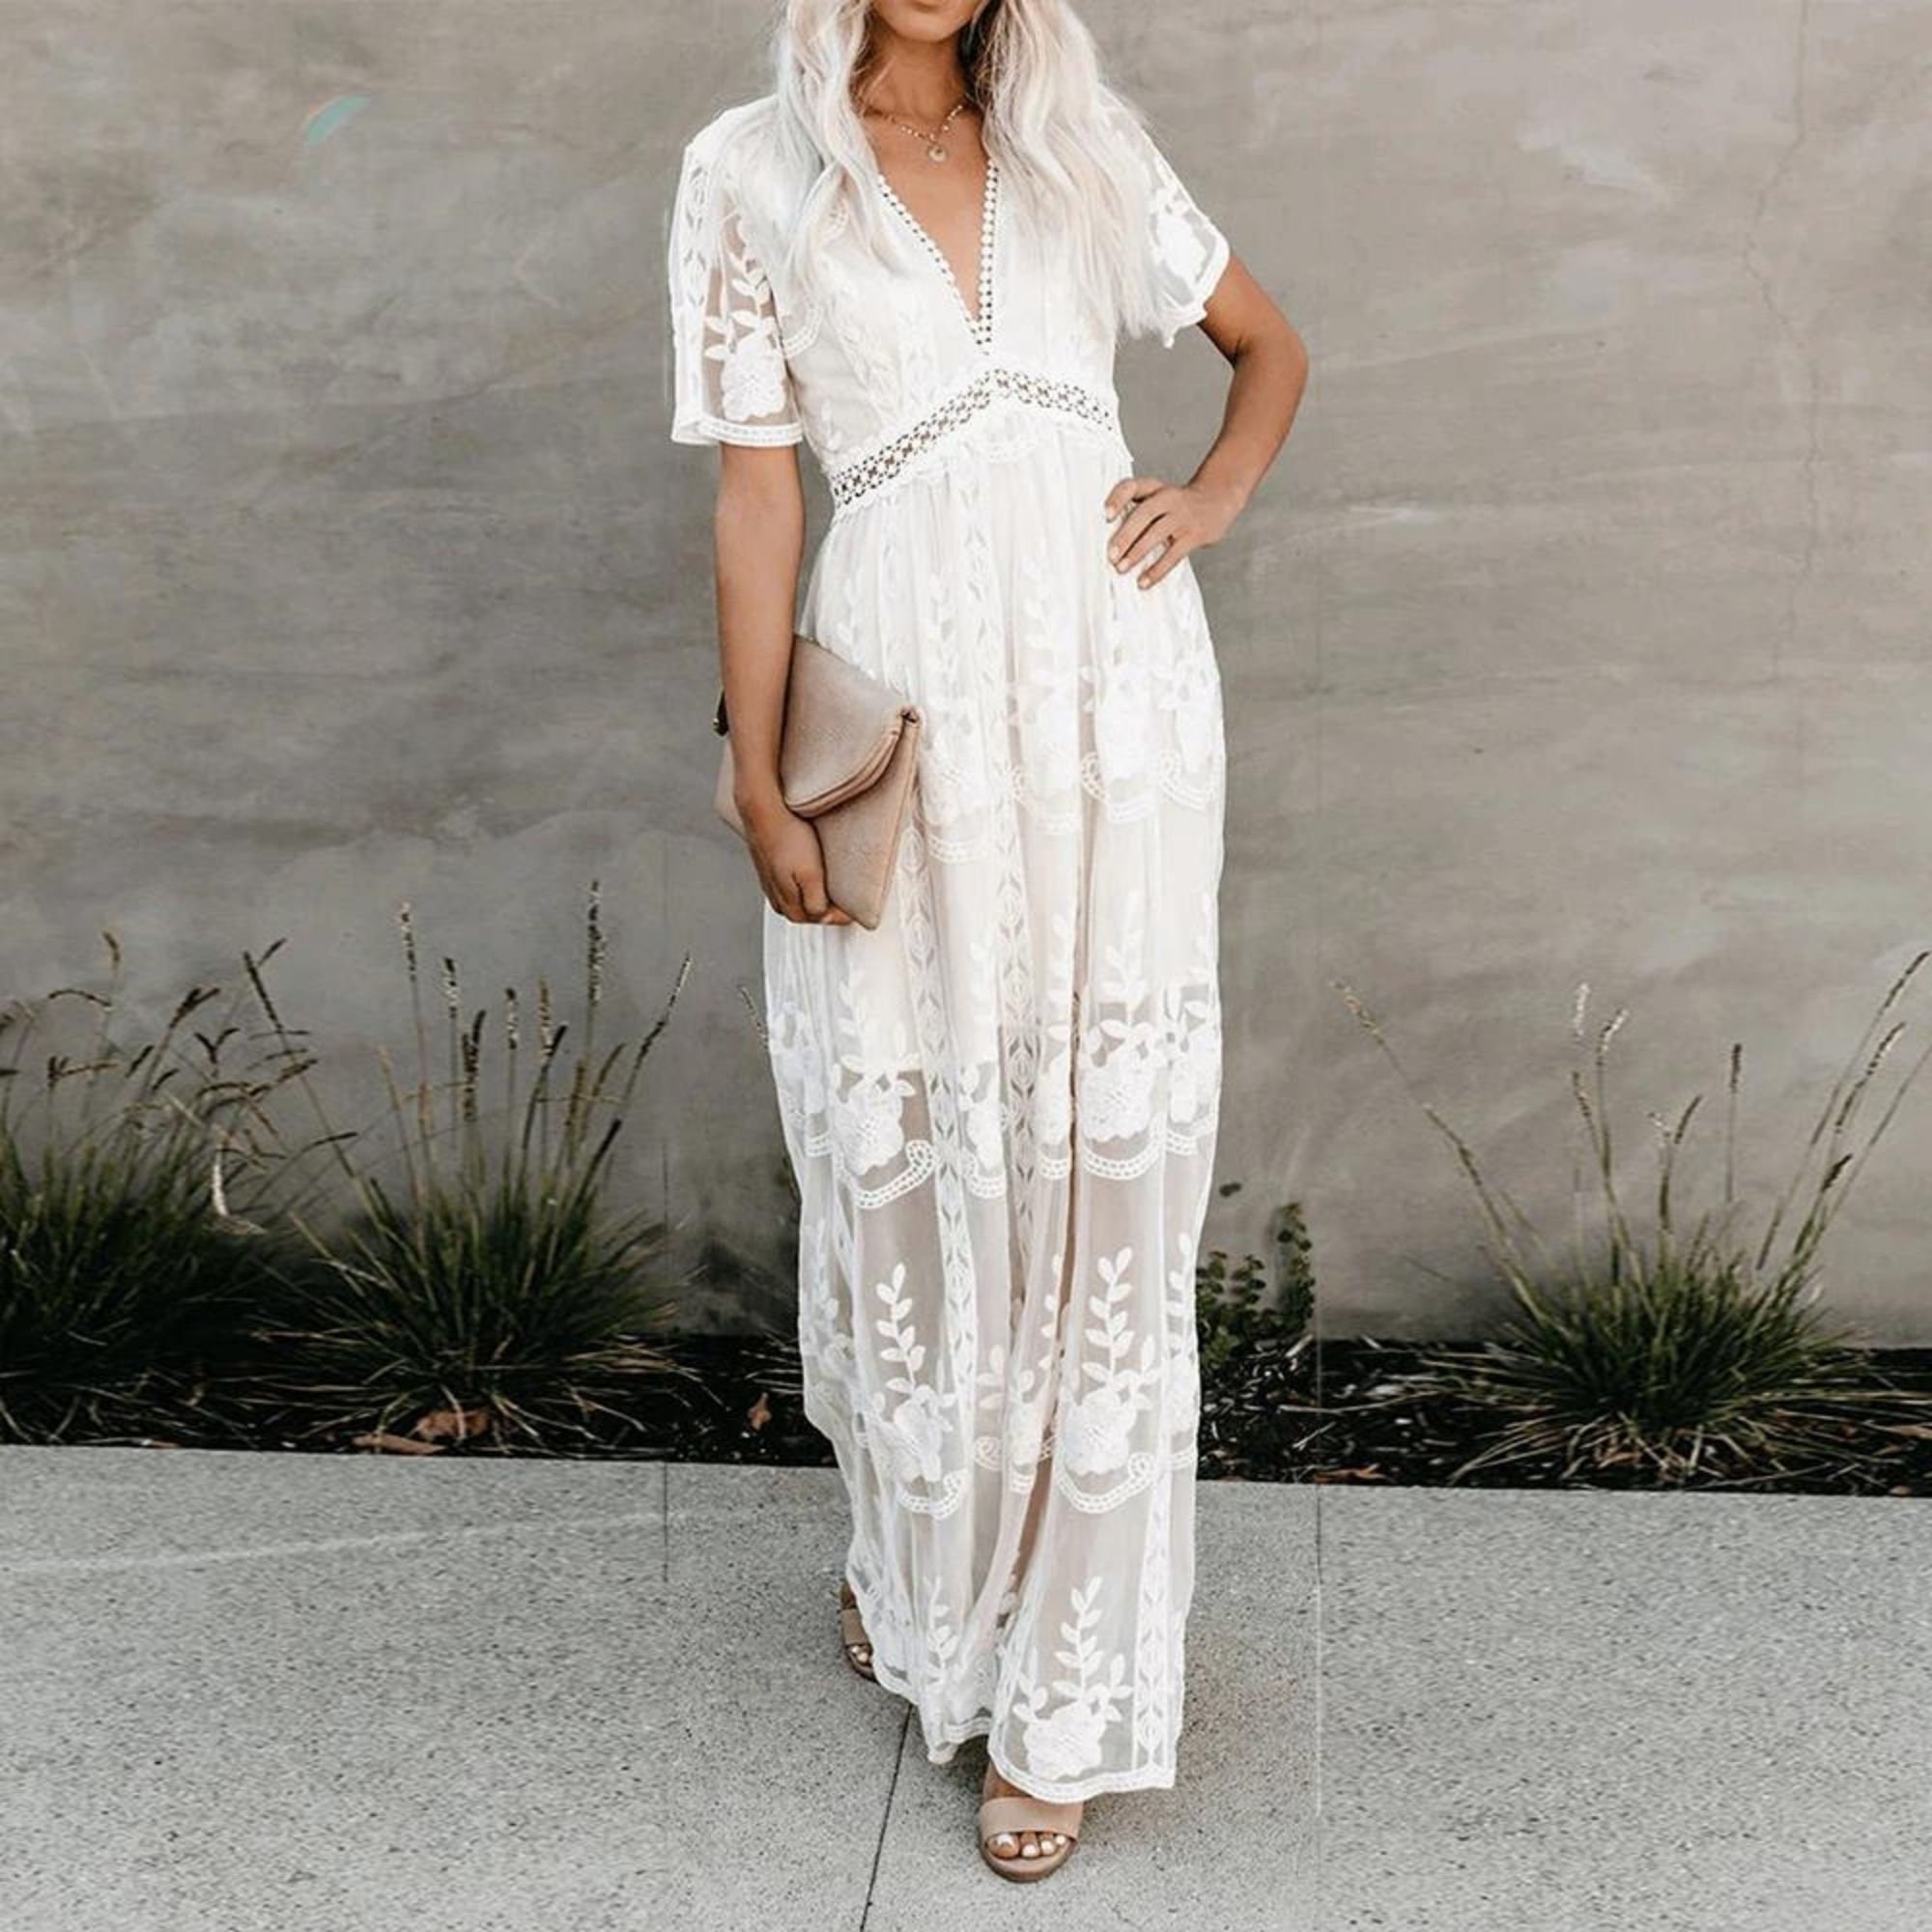 Summer Embroidered White Lace Dress Maxi Dress - Etsy